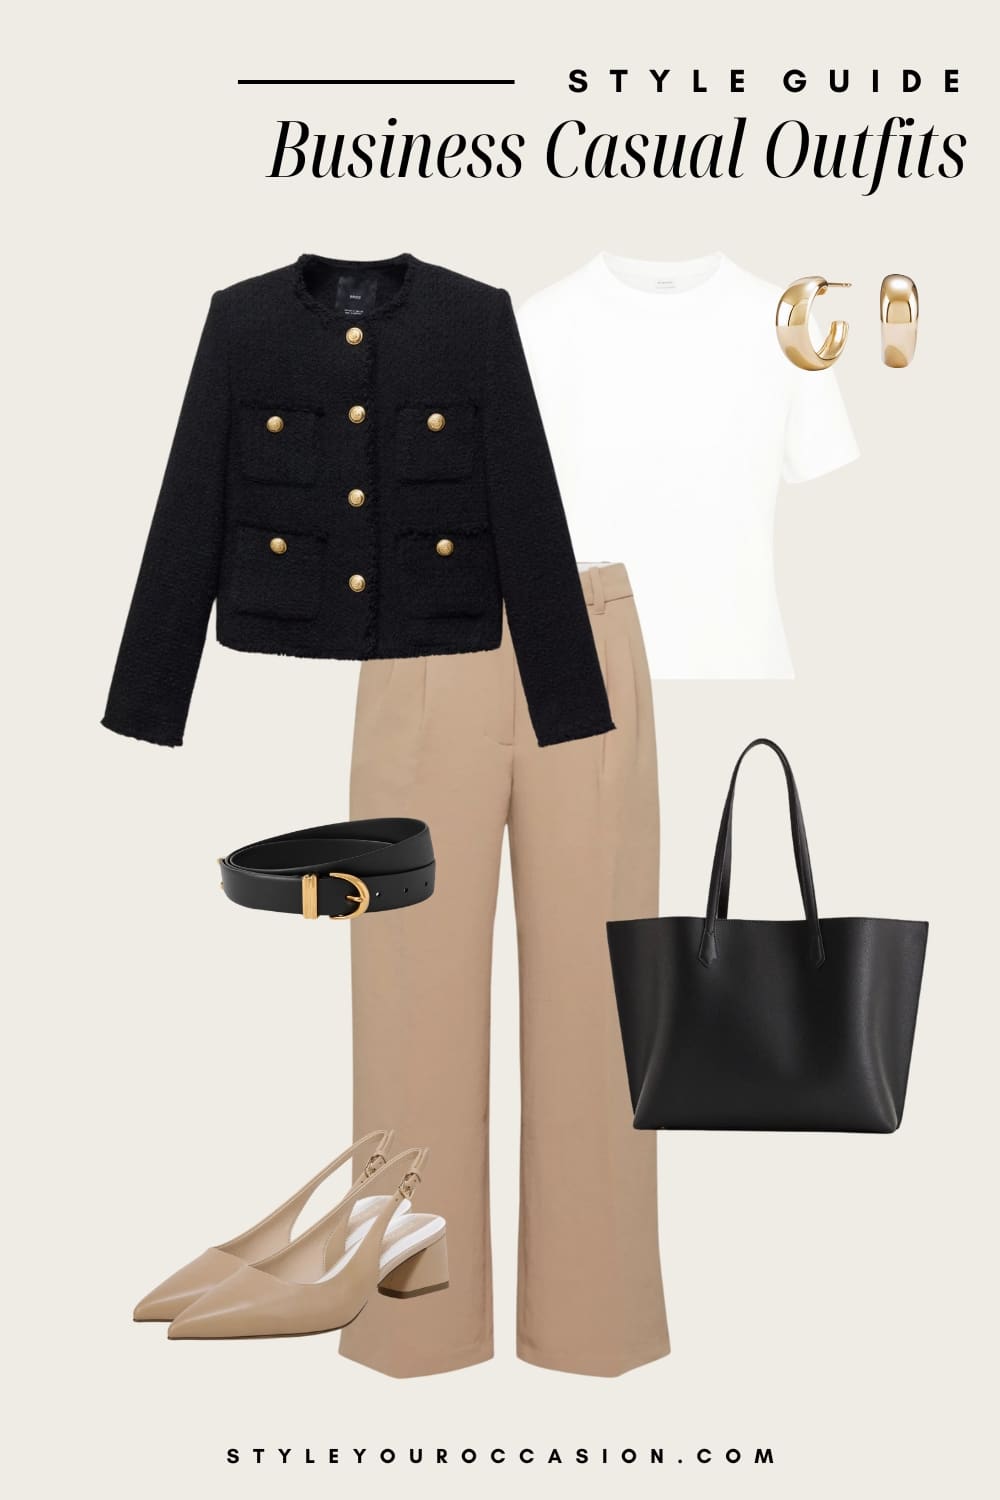 an image board of a business casual outfit featuring beige trousers, a black lady jacket, a white tee, black beige slingback heels, and black and gold accessories